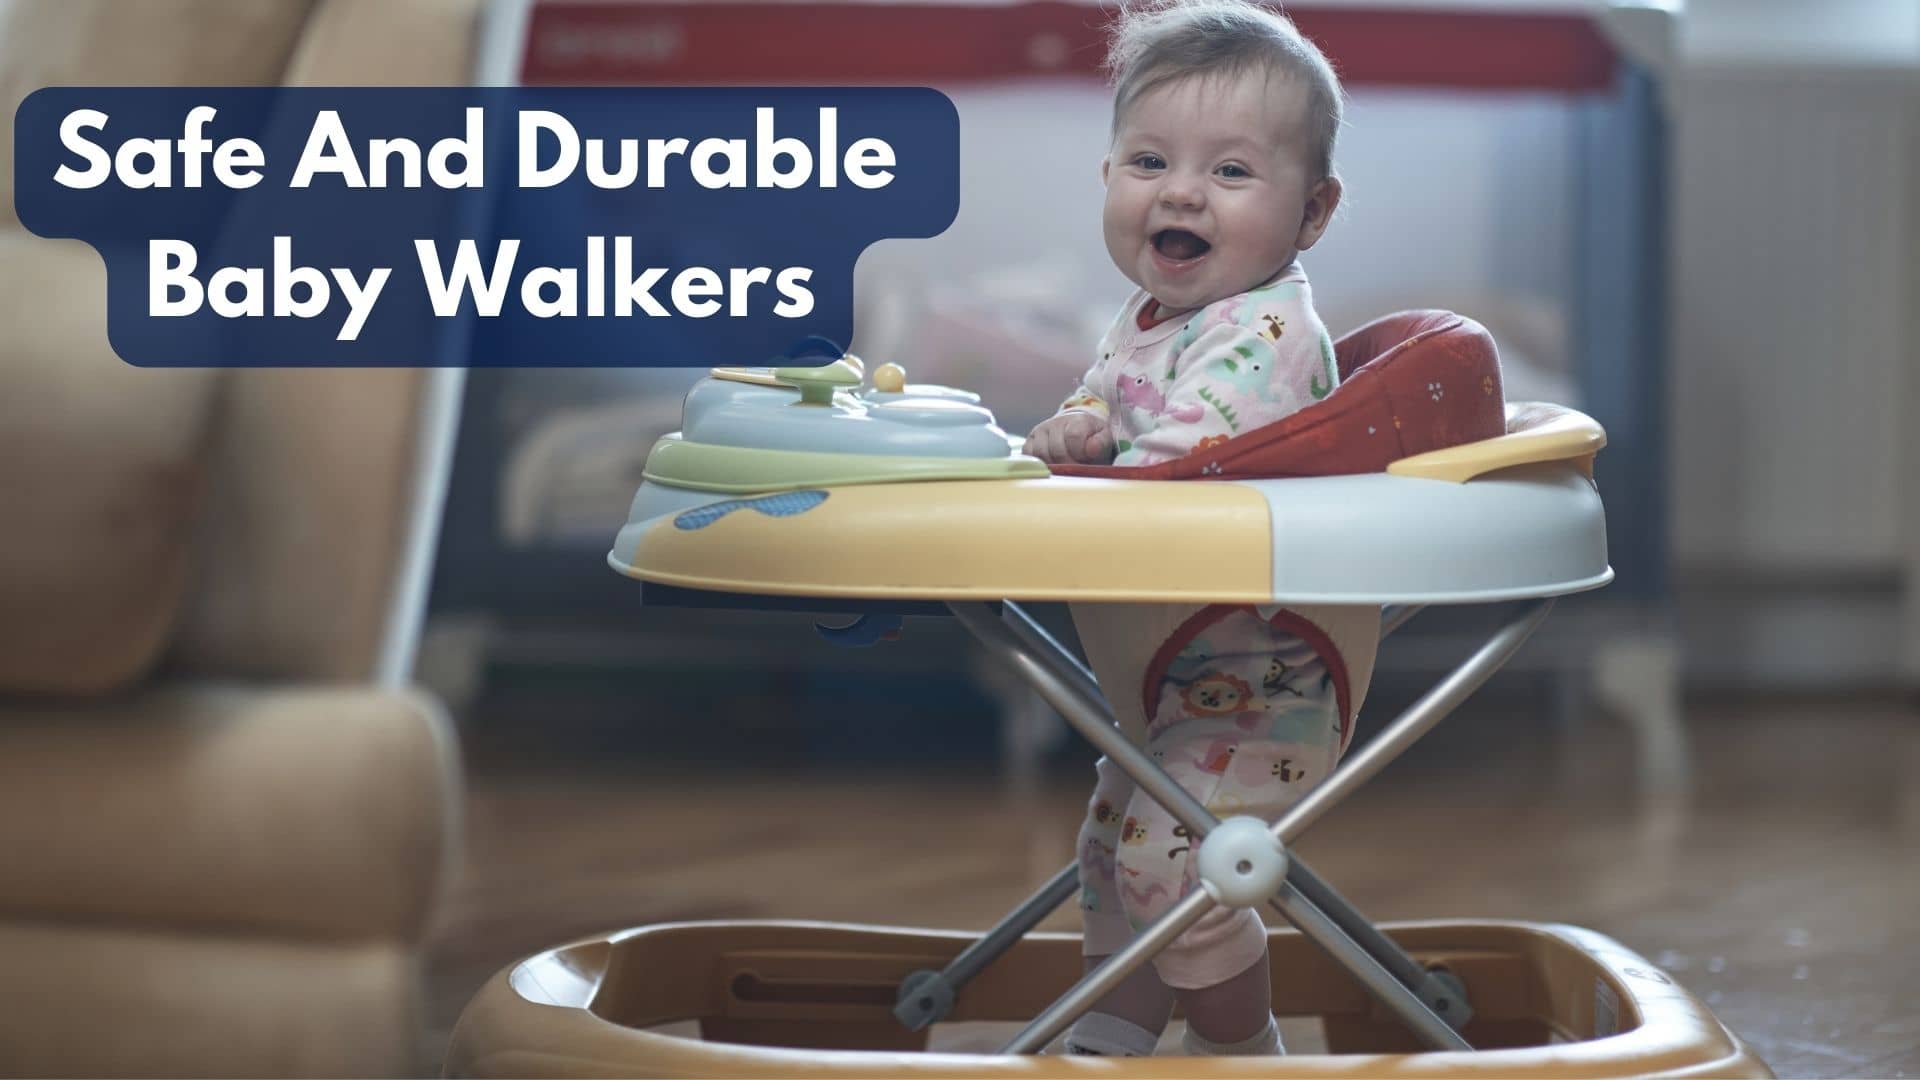 How Do I Choose Durable And Safe Baby Walkers?